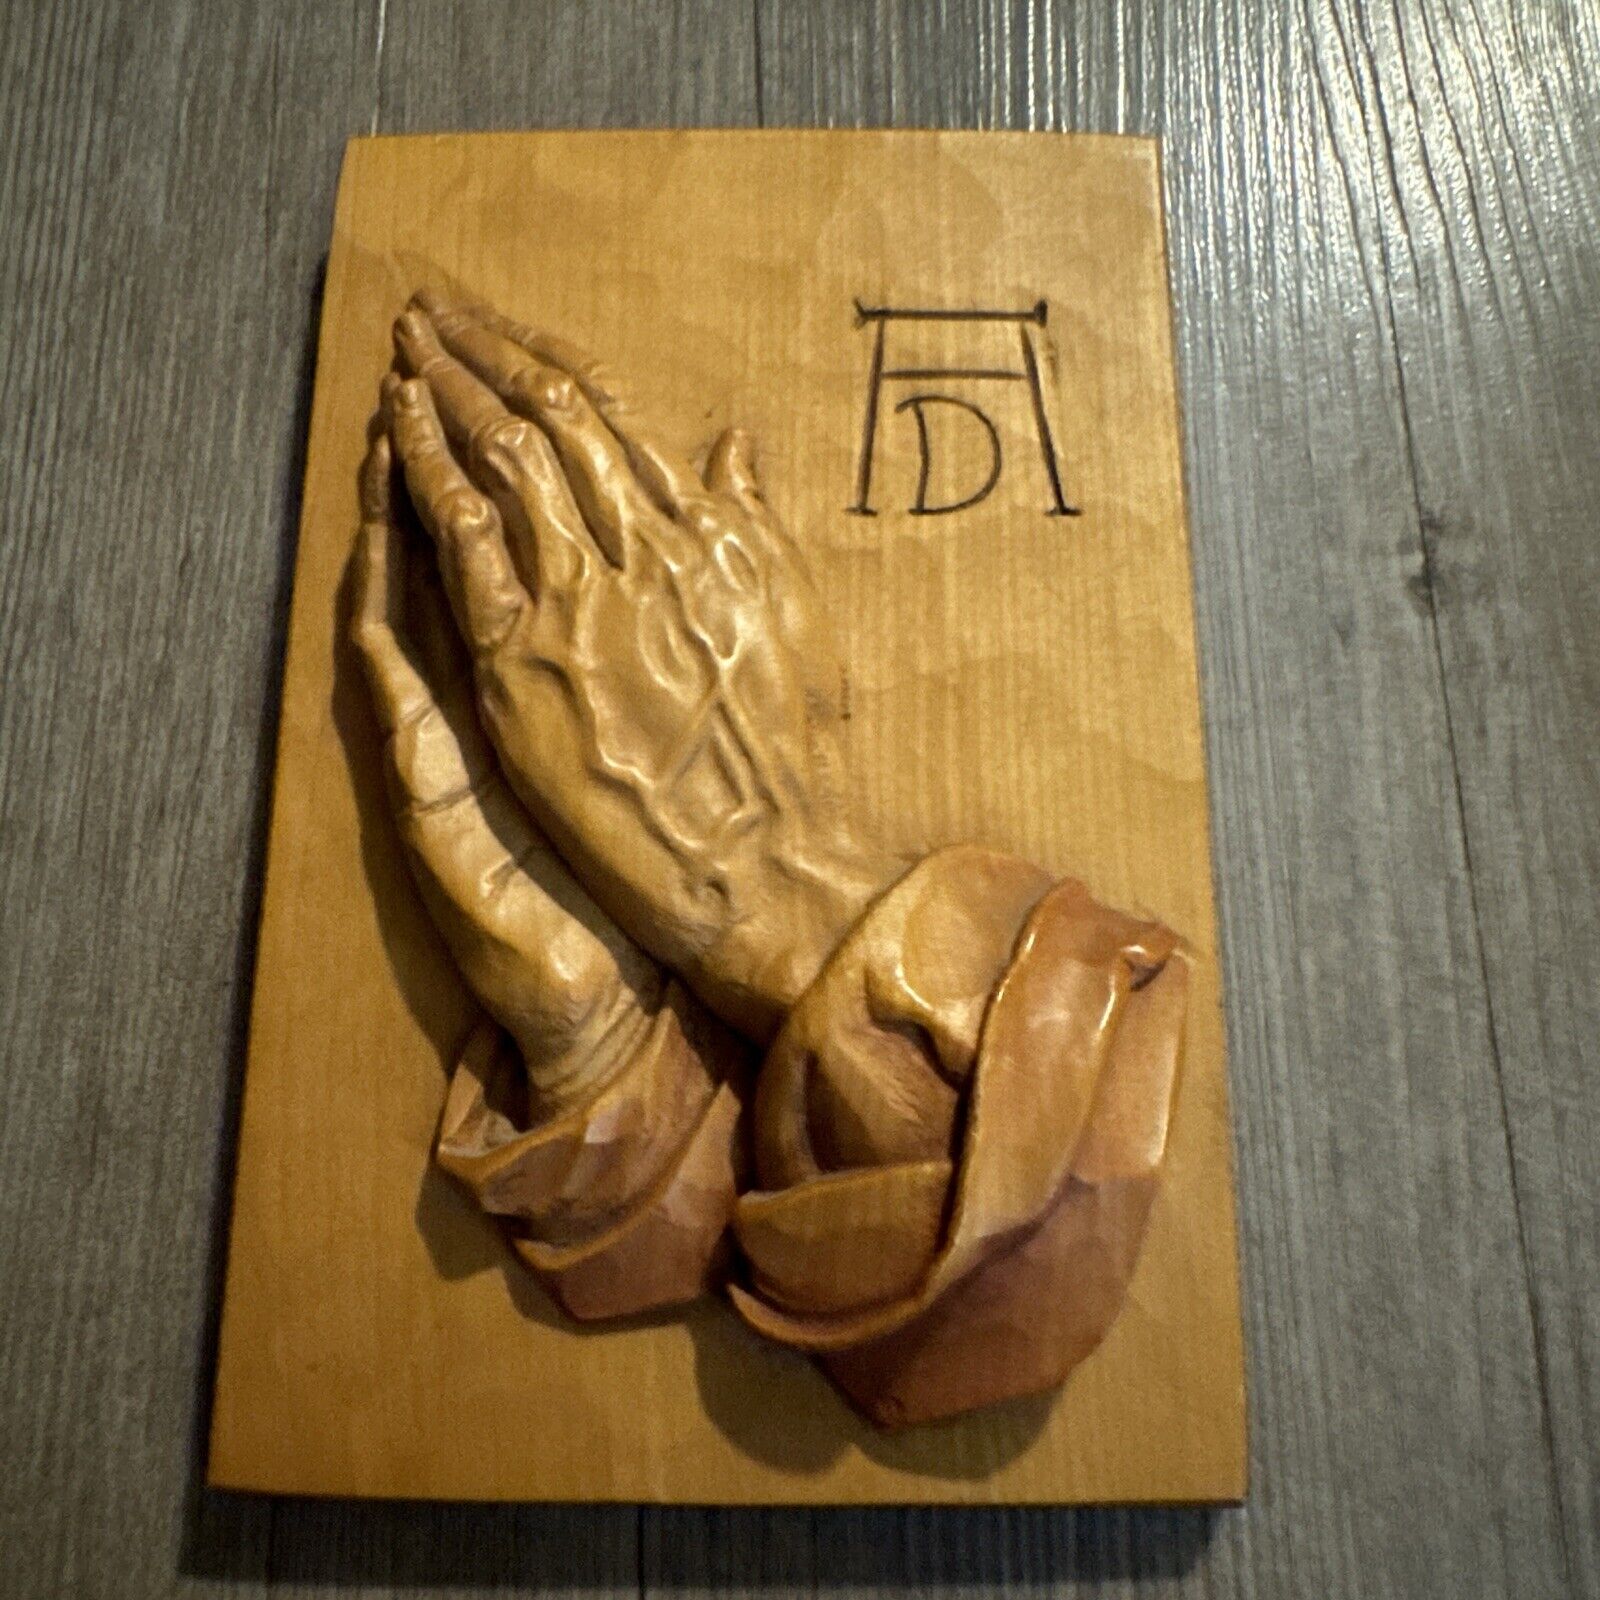 Vintage Religious Christian Wood Carved Praying Hands 5x7 Wall Plaque ANRI